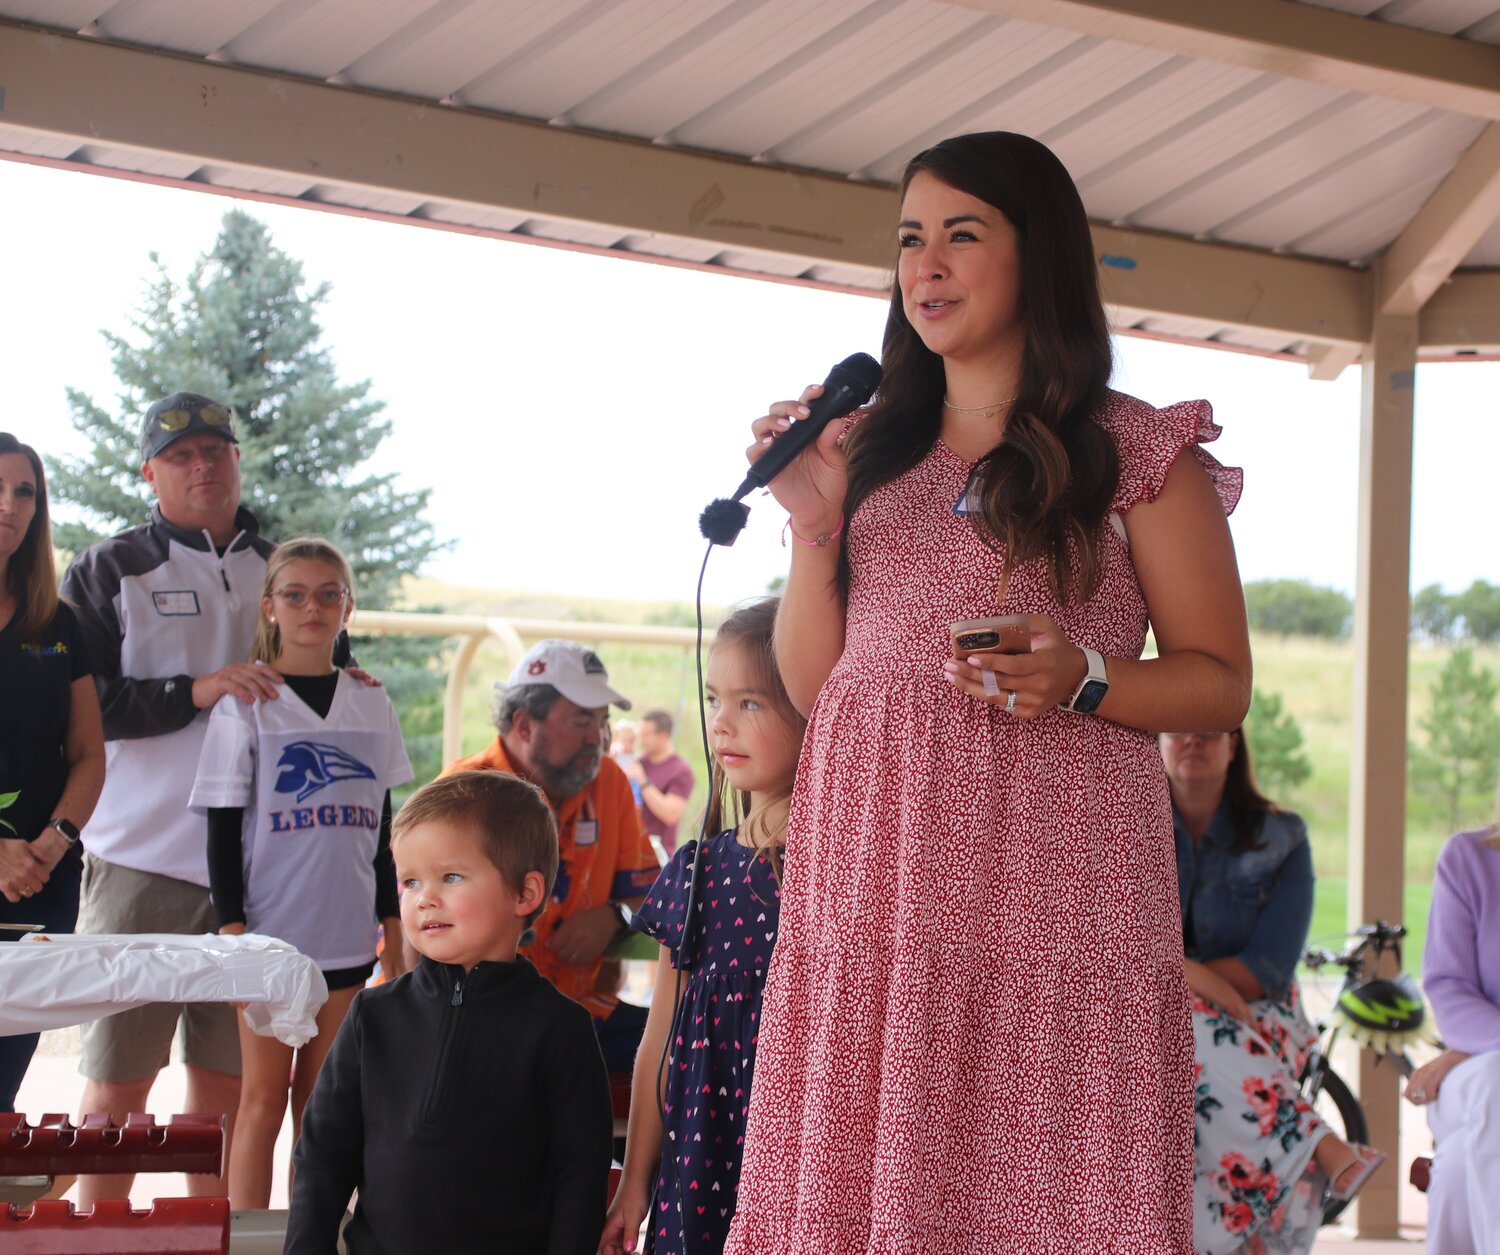 Lenaya Dotseth, a Sterling Ranch resident, speaks at the Invest in DCSD campaign kick off on Aug. 13 while her children, Everly and Cohen, offer support. The Douglas County School District is asking voters to approve funding for new schools and more competitive staff pay. PHOTO BY MCKENNA HARFORD